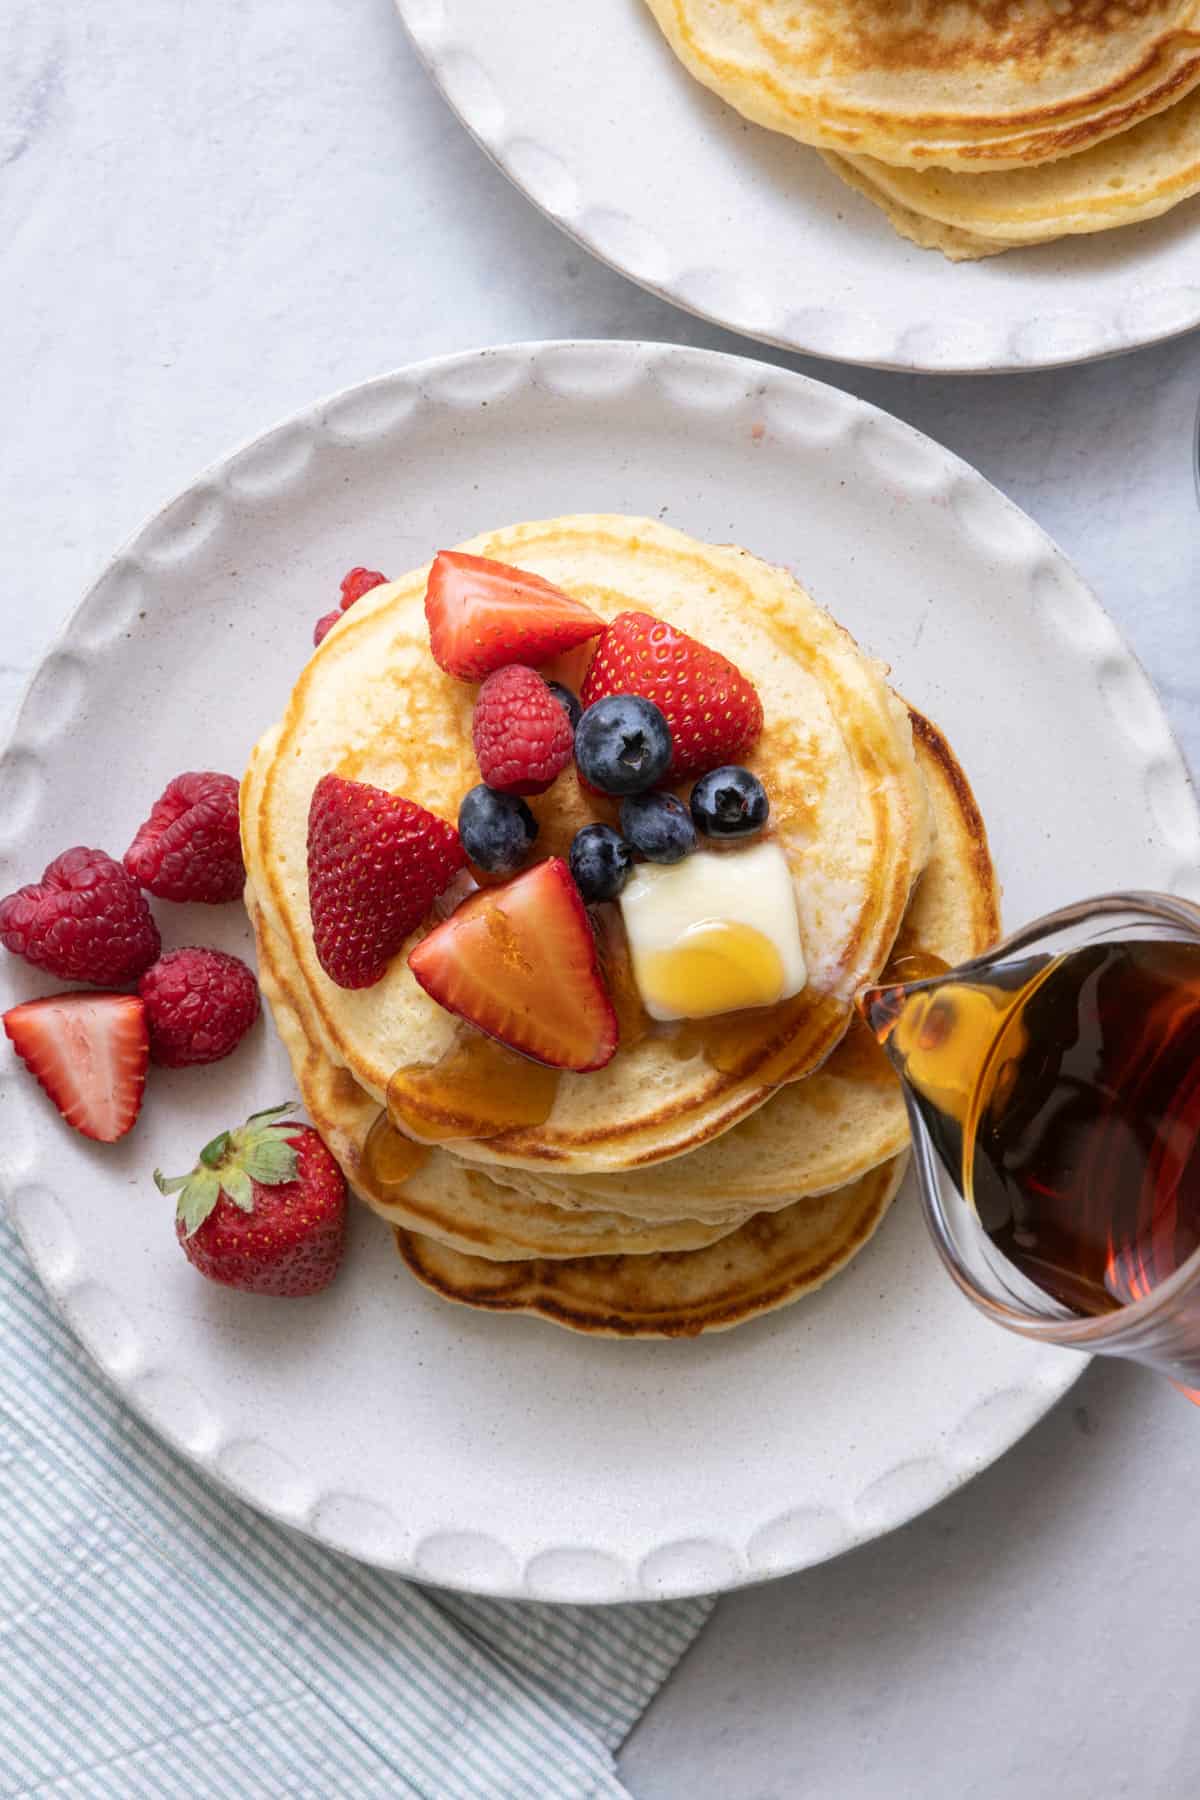 Maple syrup being poured over a stack of pancakes that is topped with fresh berries and butter.